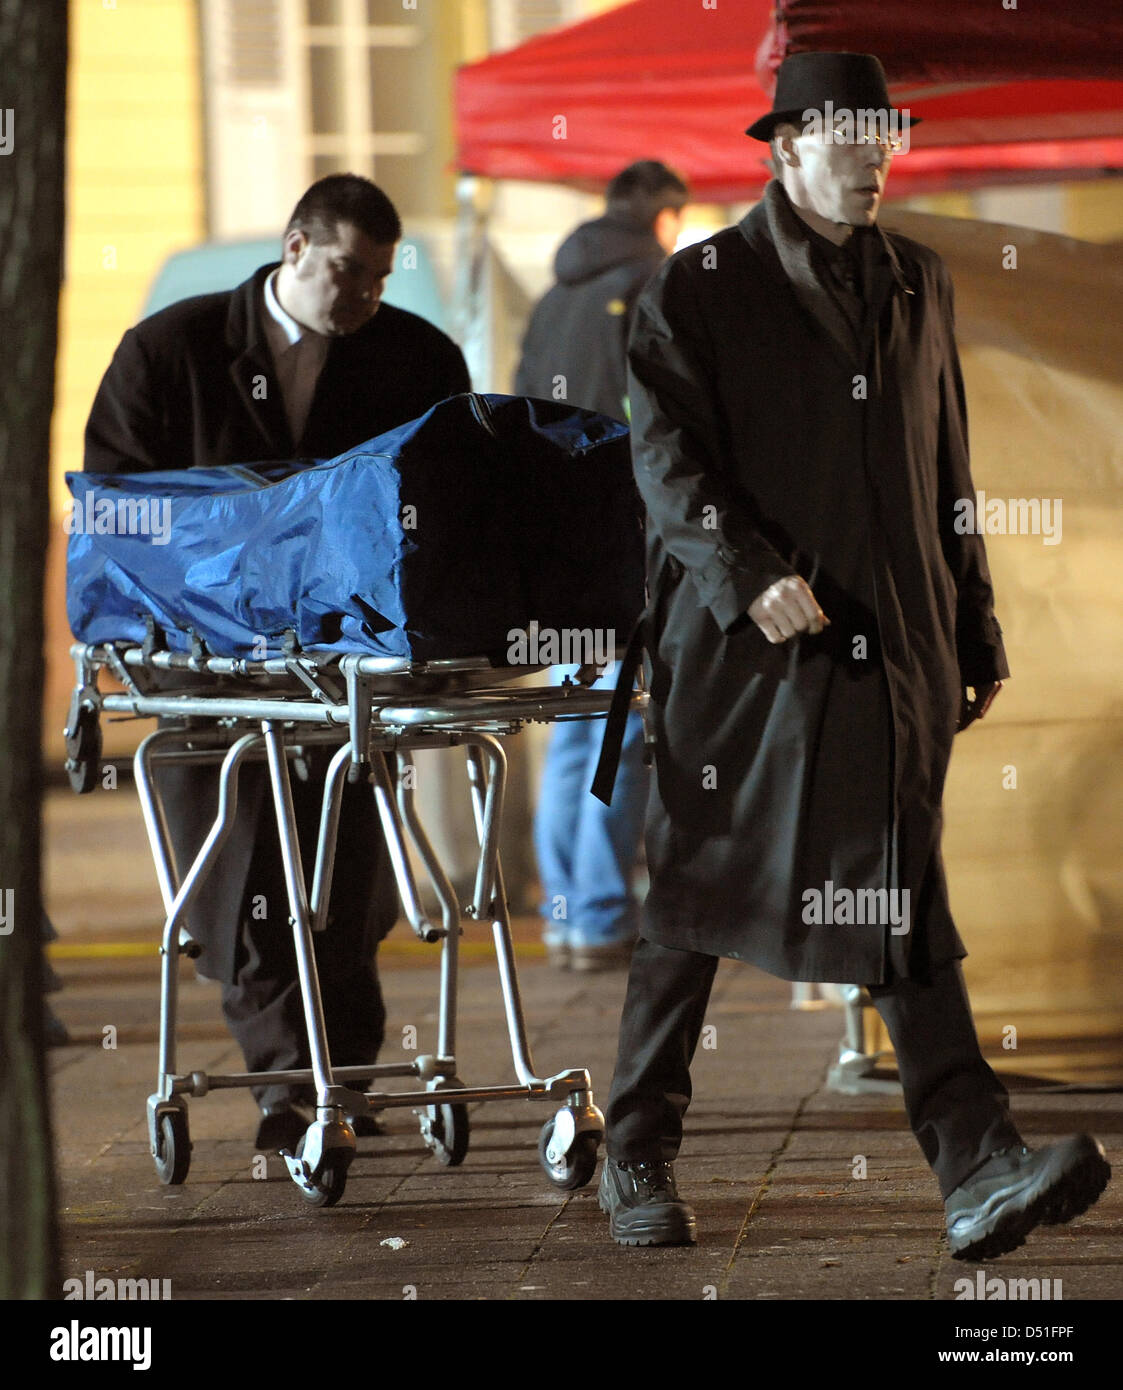 Two undertakers bring the dead body of one of the bank robbers to a car after a bank hold-up in Karlsruhe, Germany, 10 December 2010. In the course of a bank hold-up on a highly frequented shopping street, the police shot the two bank robbers, a man and a woman, dead. A female police officer was severely injured during the operation. Photo: Ronald Wittek Stock Photo